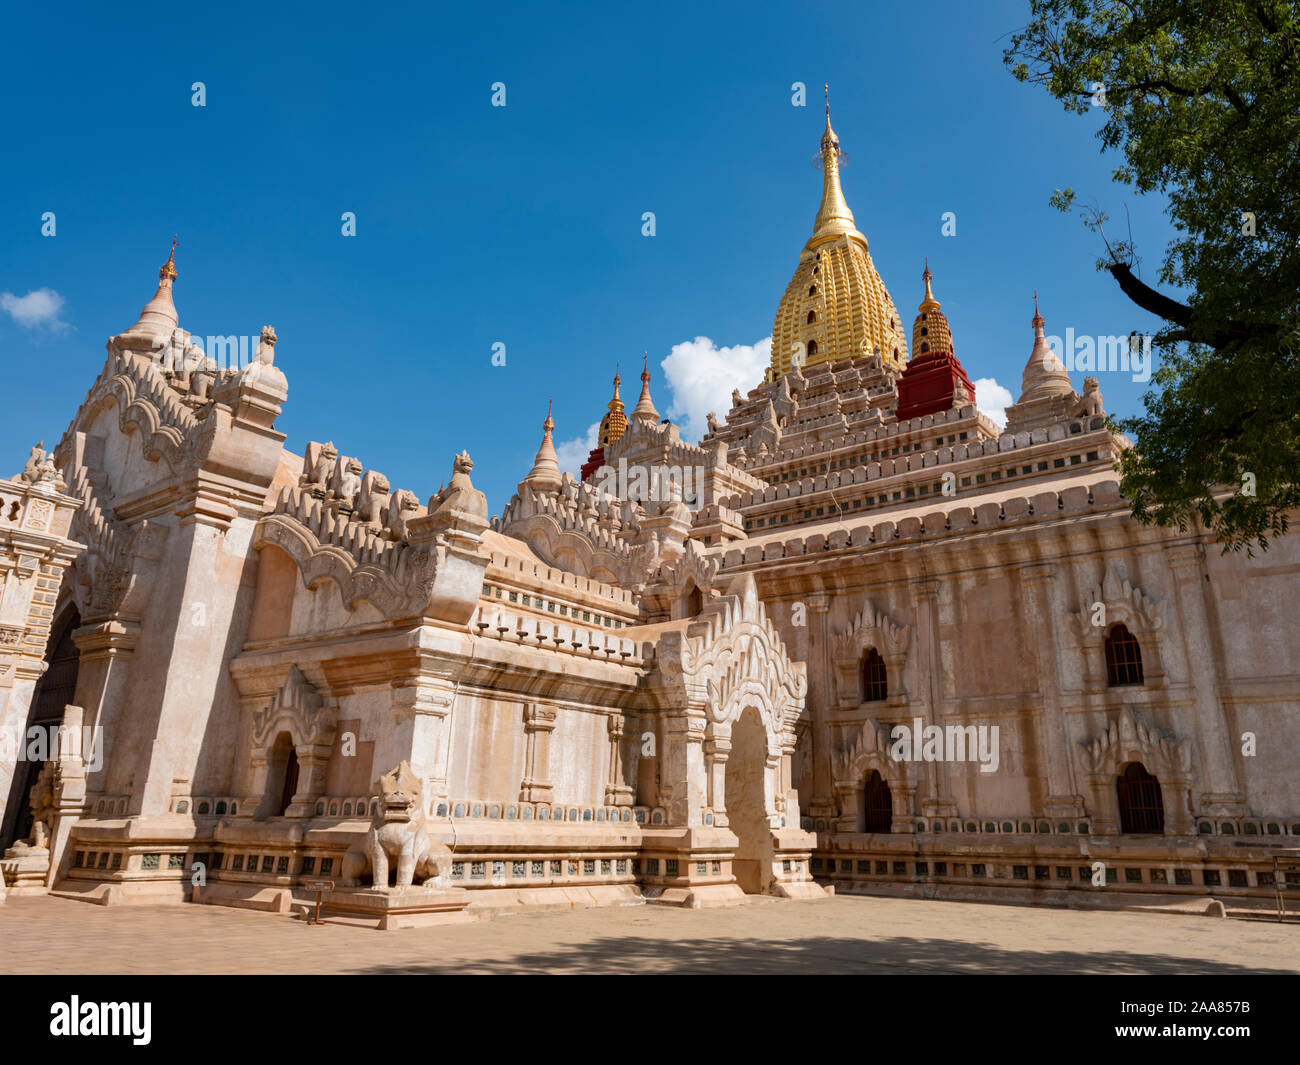 The magnificent Ananda Temple in the archeological zone of ancient Bagan (Pagan), Myanmar (Burma) restored by the Government of India Stock Photo